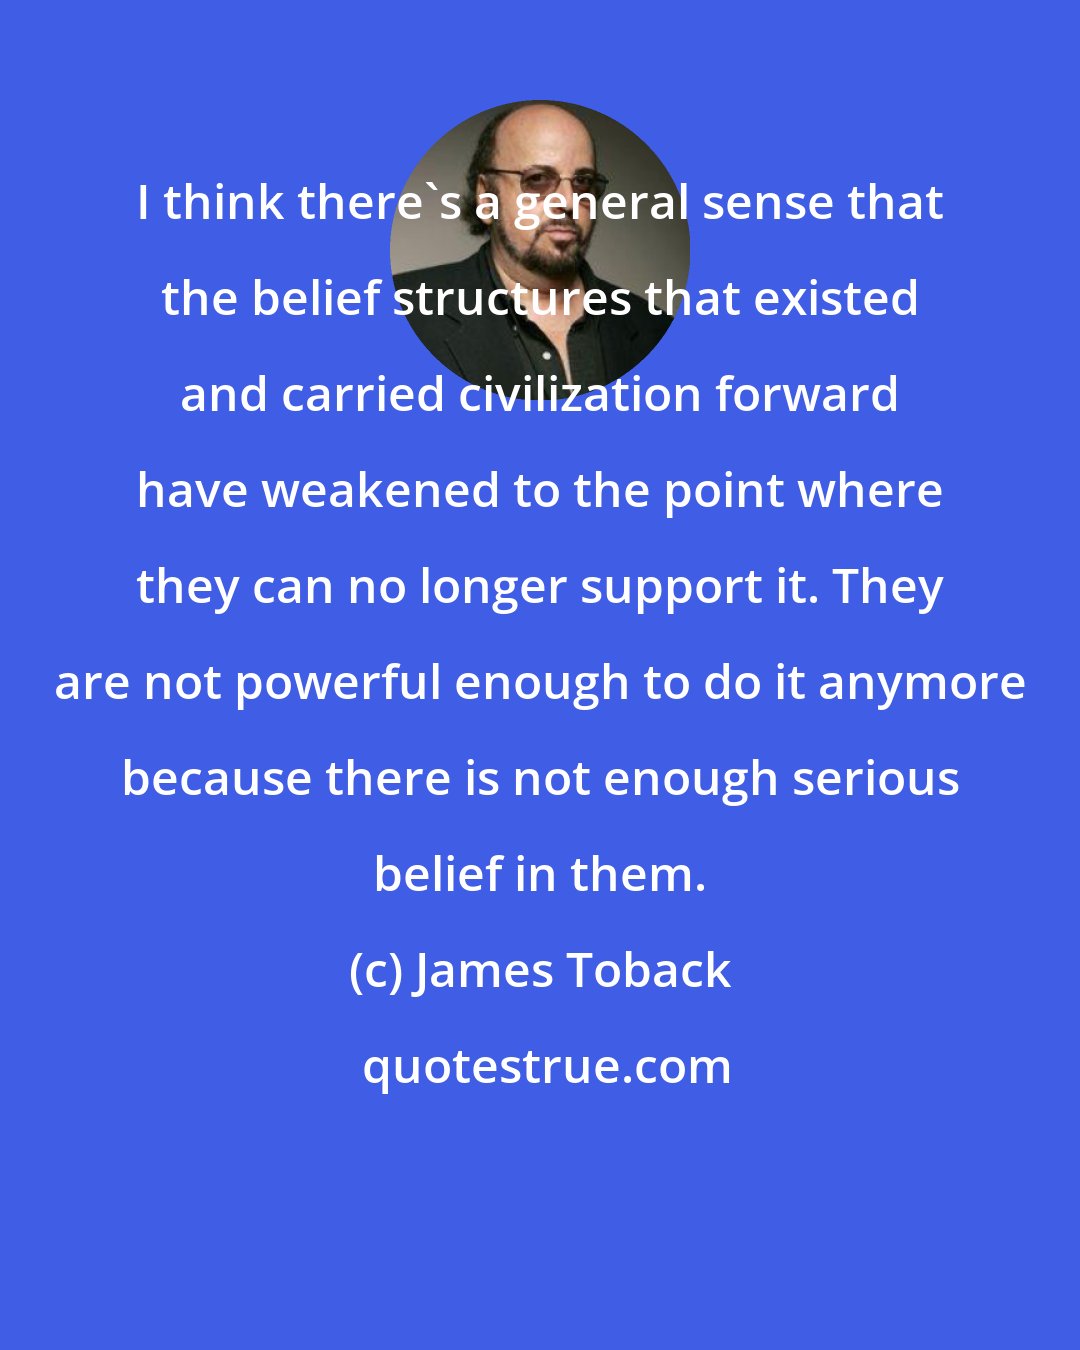 James Toback: I think there's a general sense that the belief structures that existed and carried civilization forward have weakened to the point where they can no longer support it. They are not powerful enough to do it anymore because there is not enough serious belief in them.